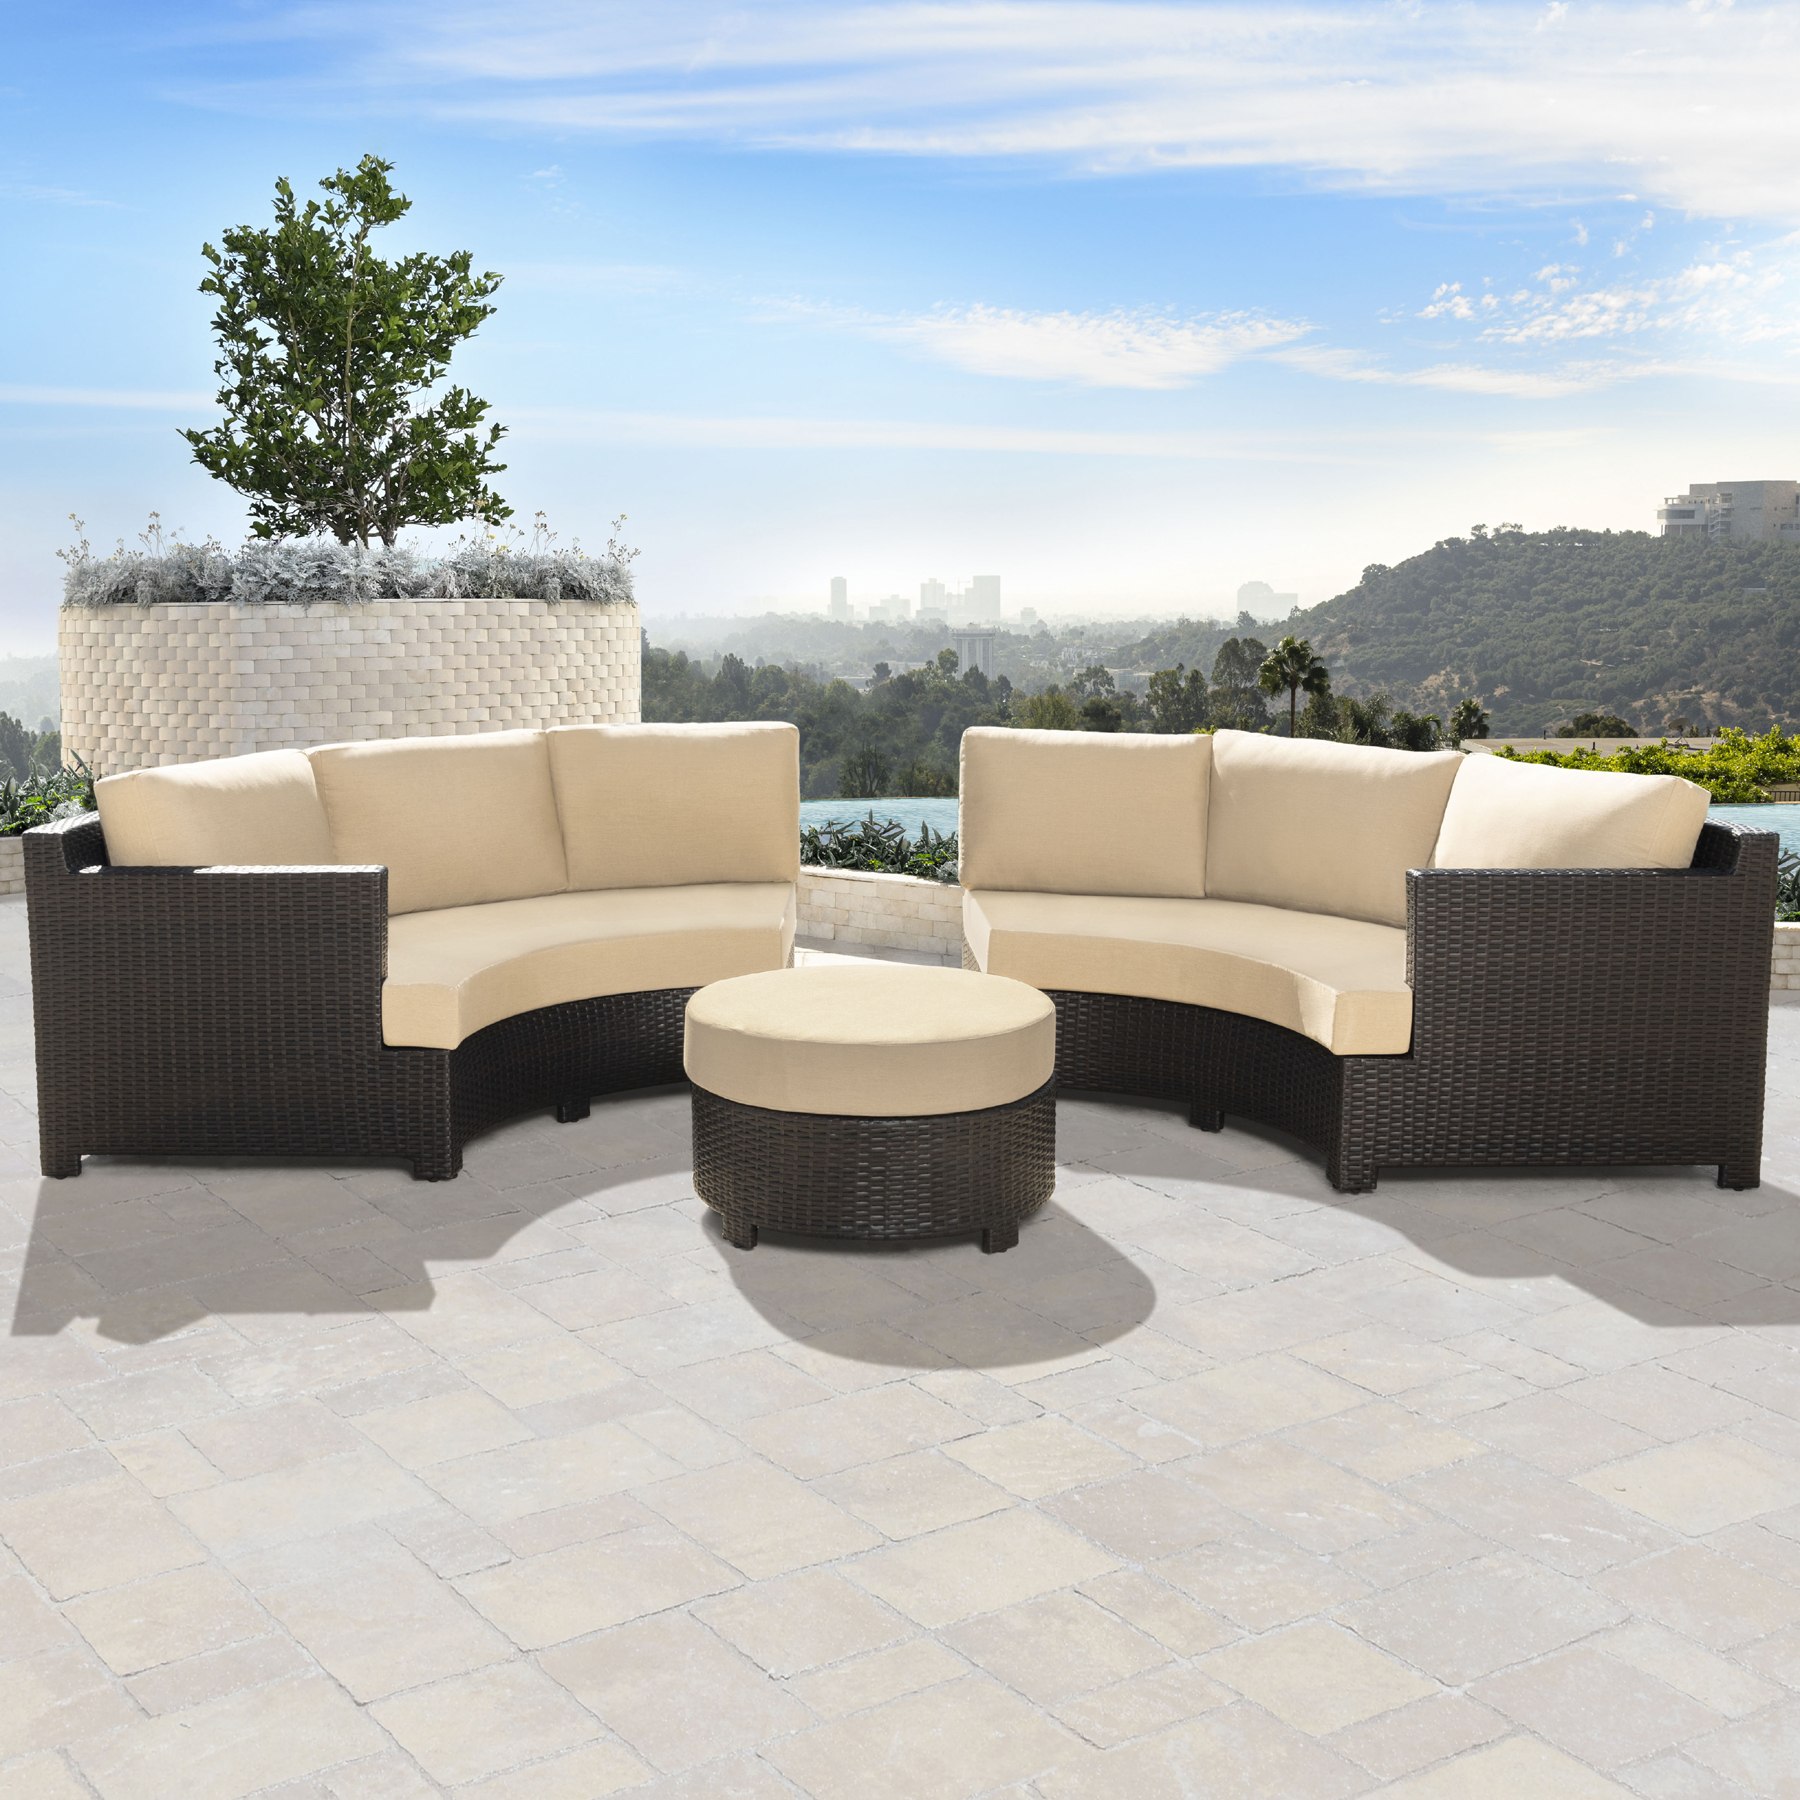 Belmont 3 Piece Curved Sectional Costco - Capilano Curved All Weather Wicker Patio Sectional Sofa